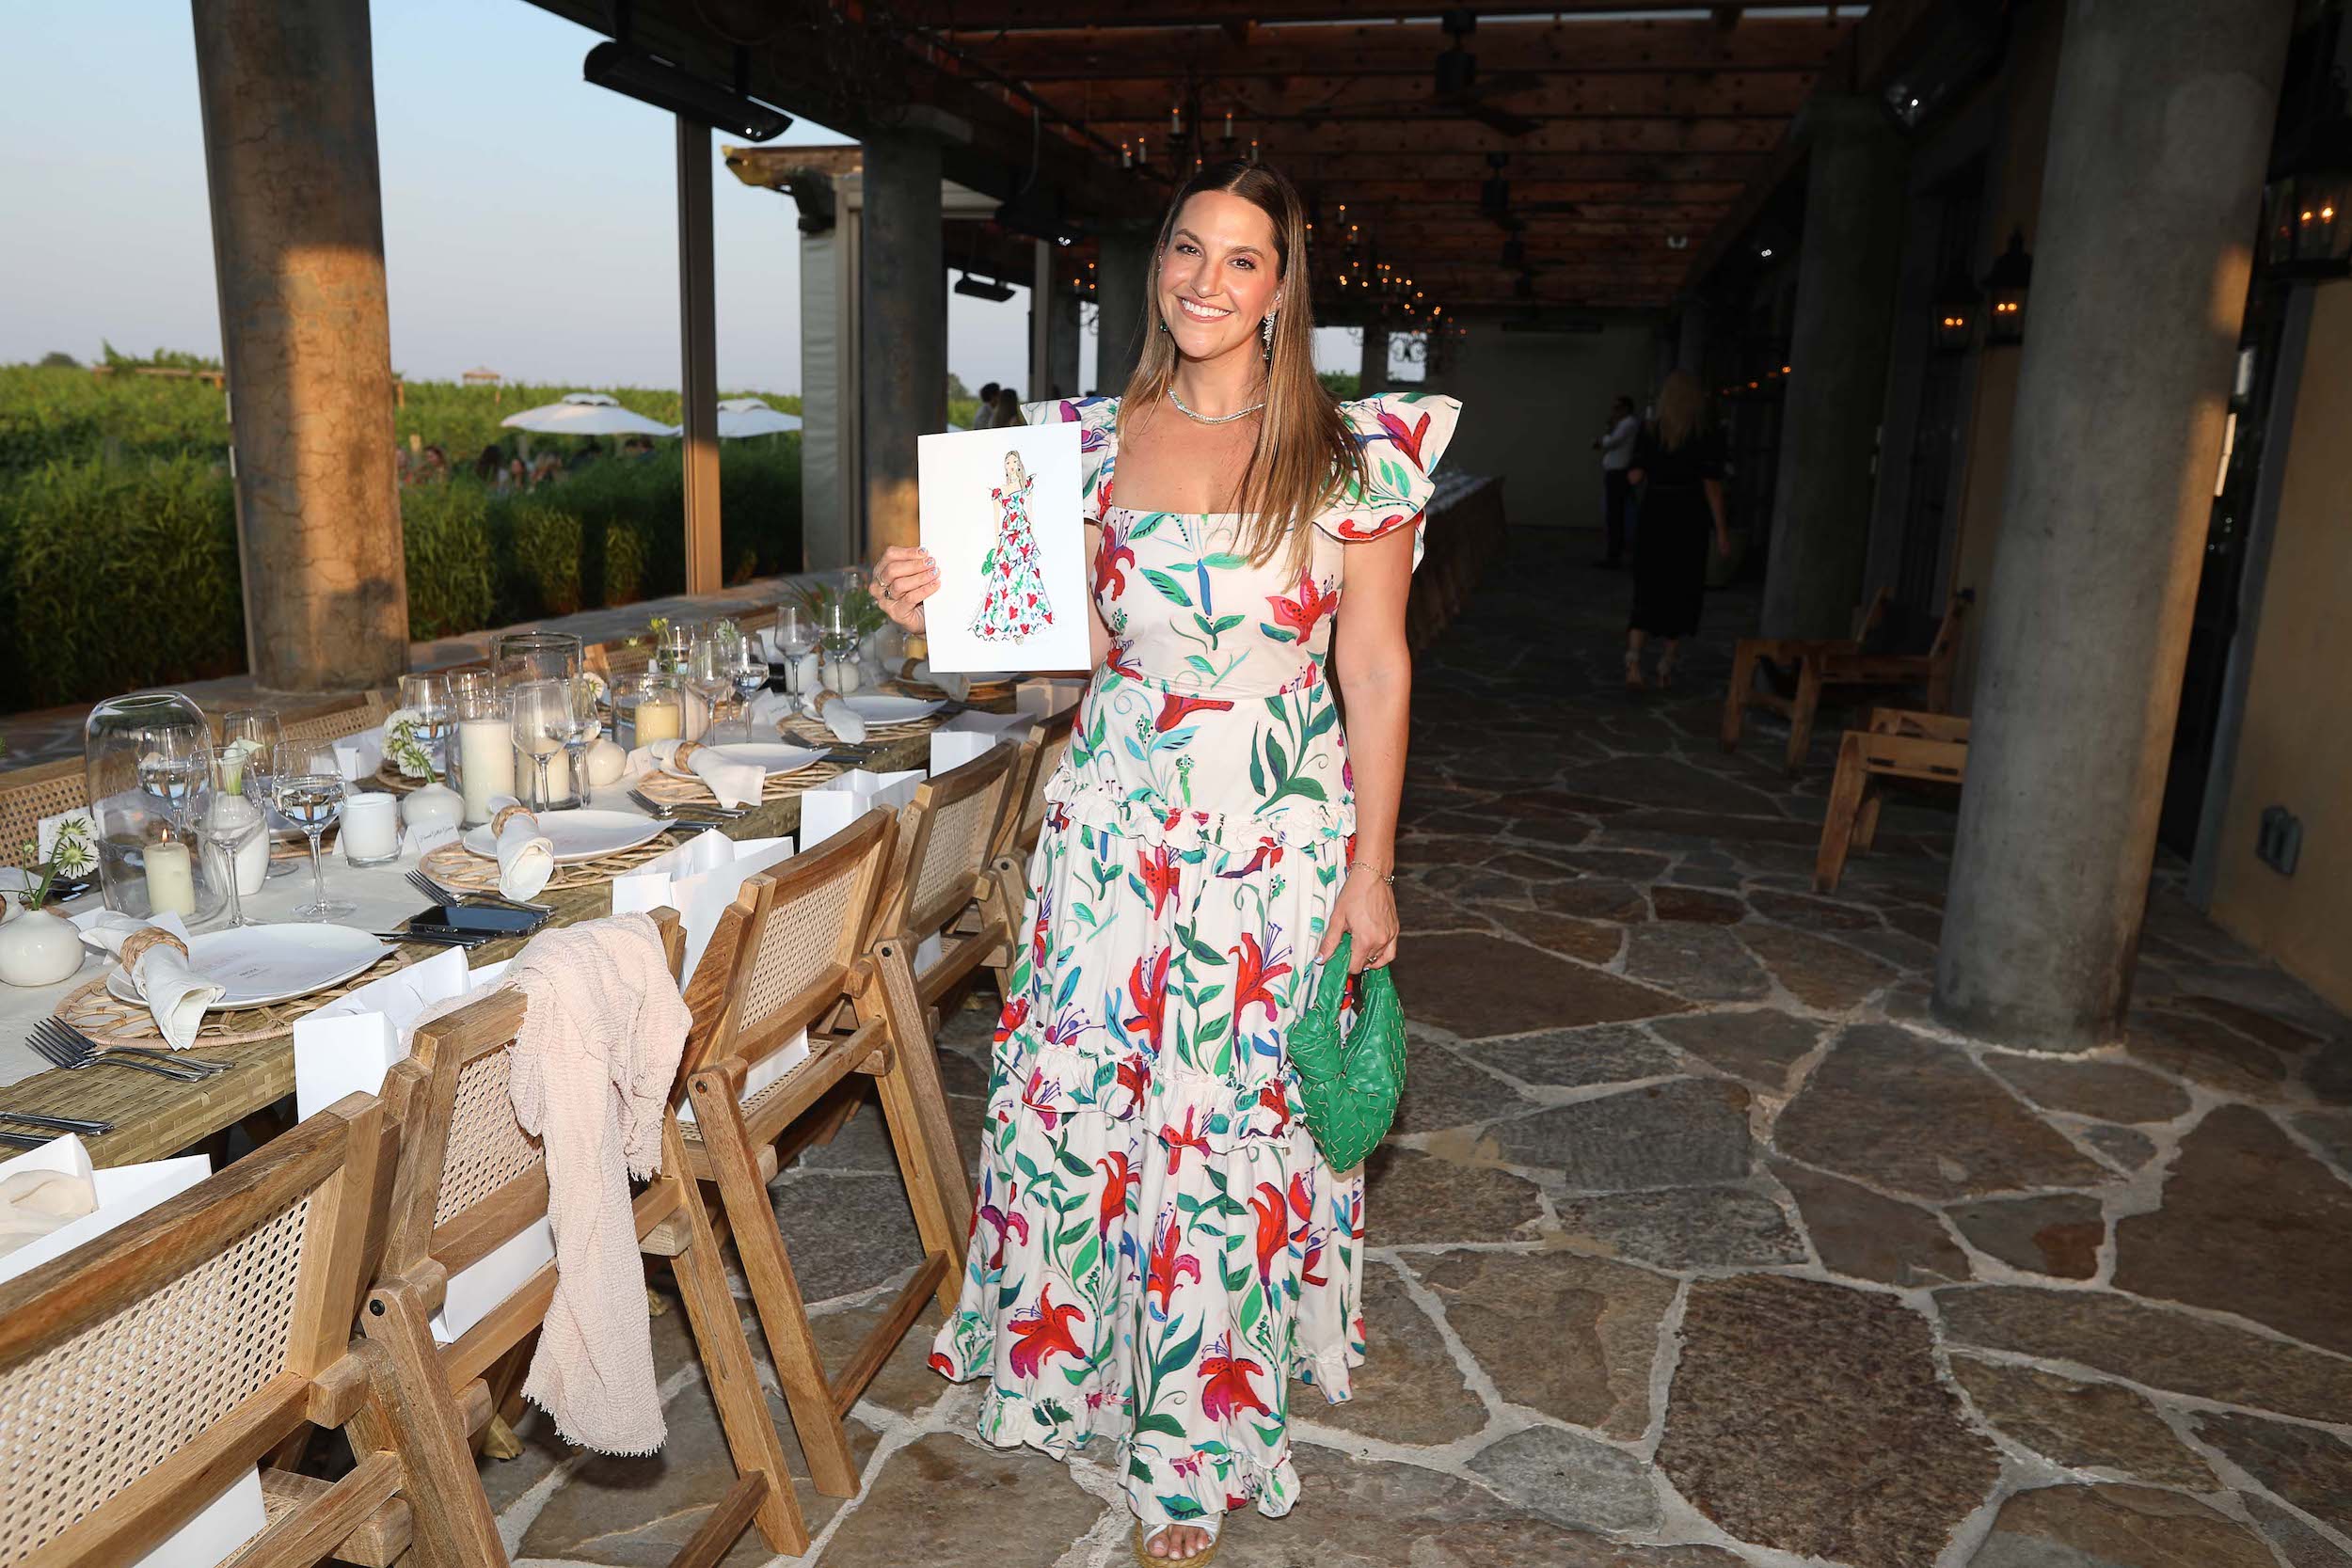 Our CURATEUR x The Zoe Report Jet Set Summer Soirée Was an Evening to  Remember